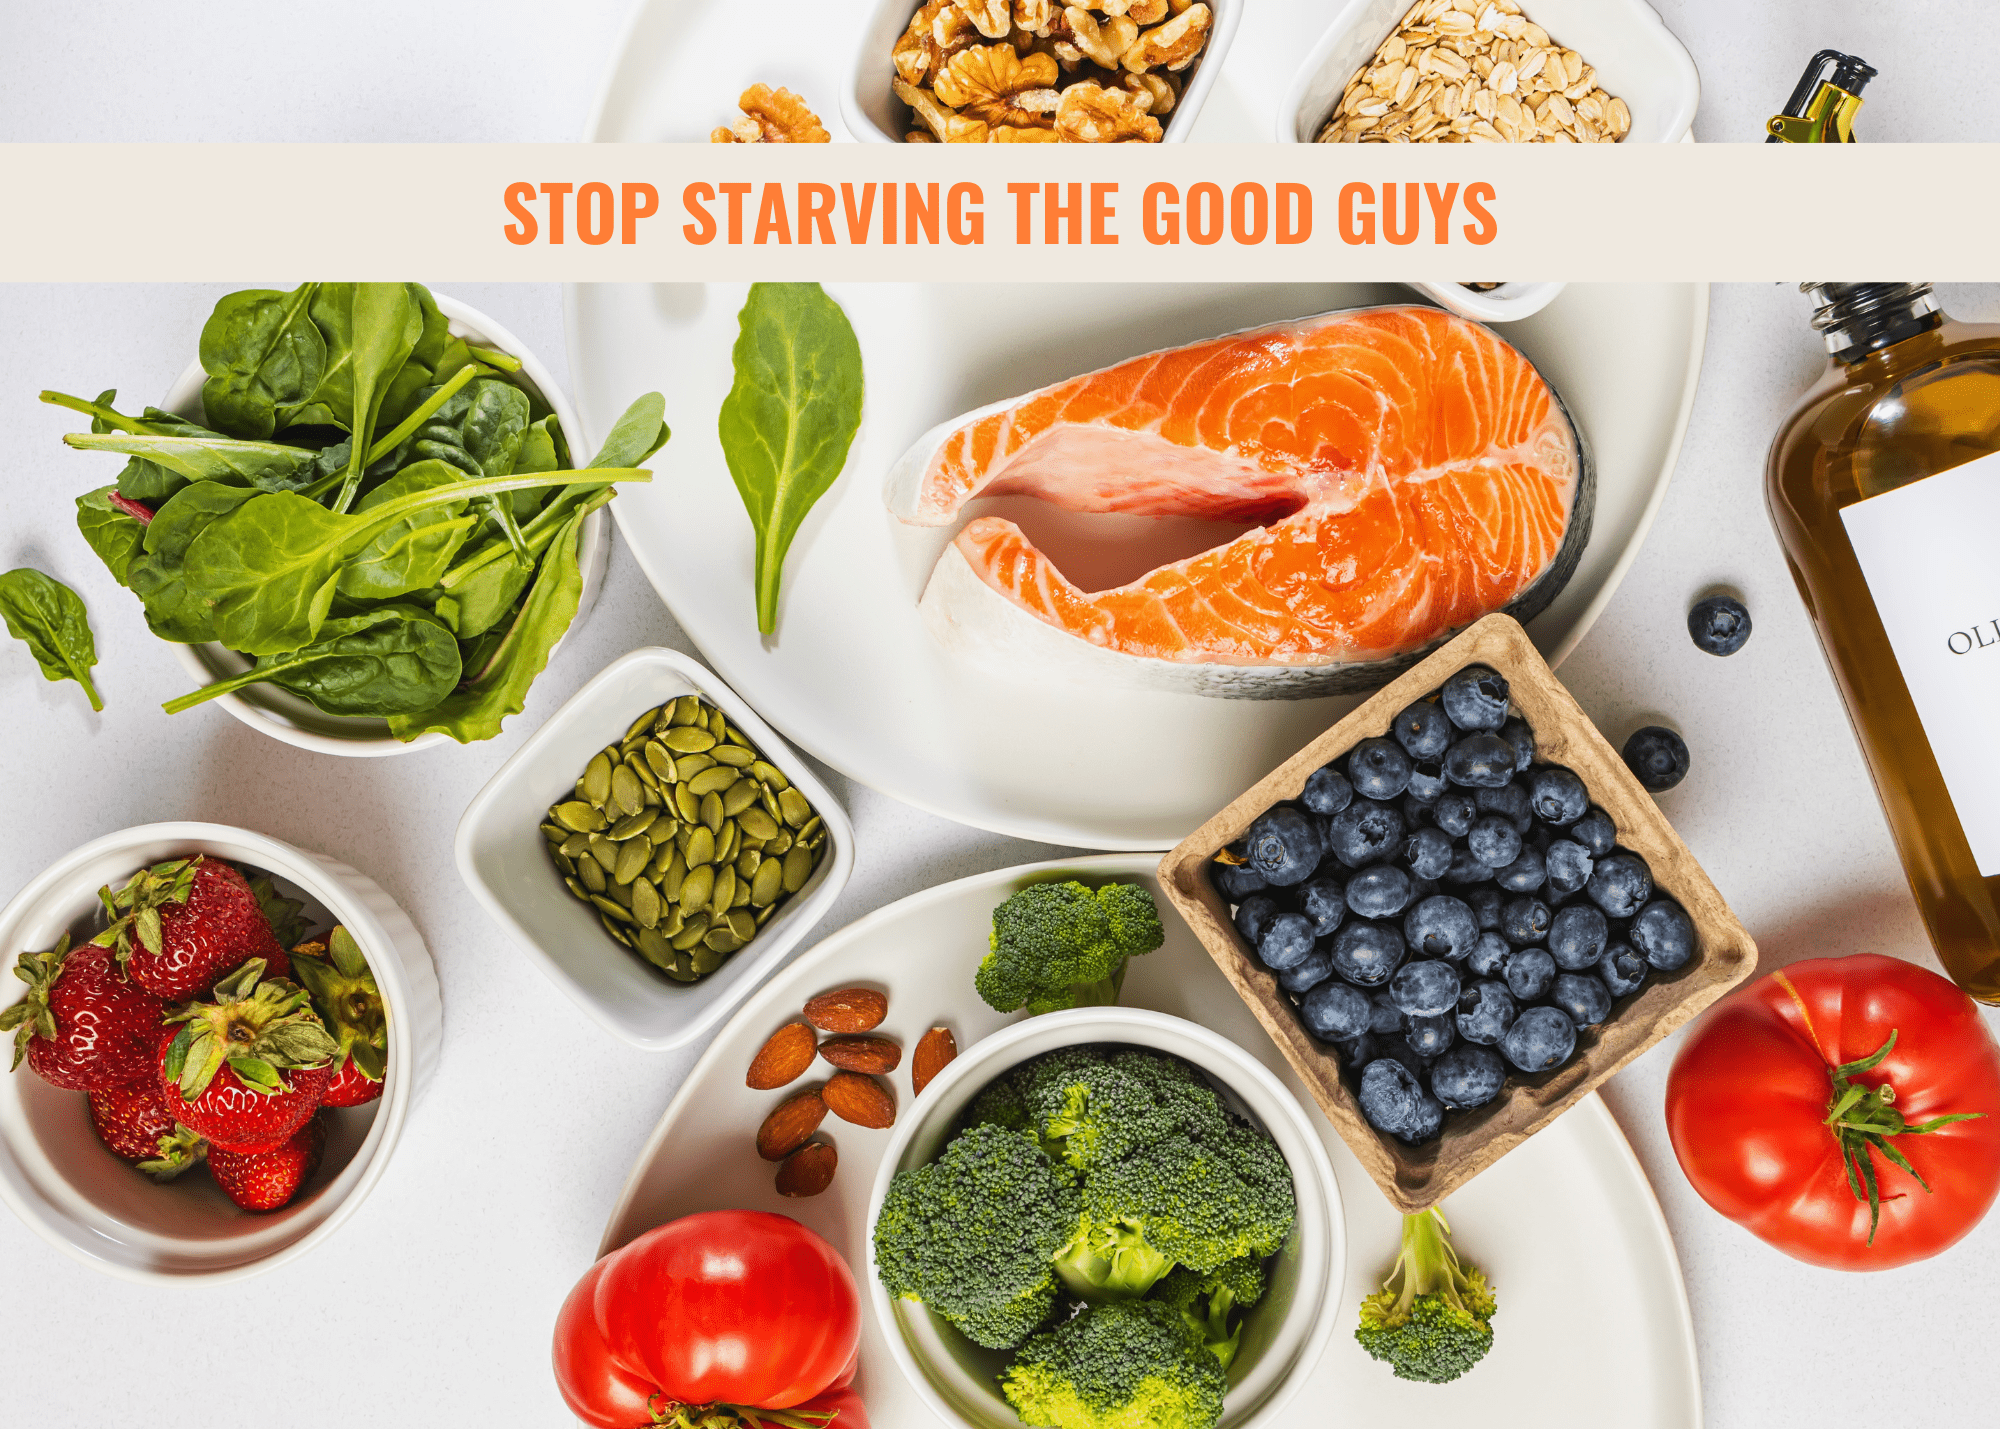 Stop Starving the Good Guys